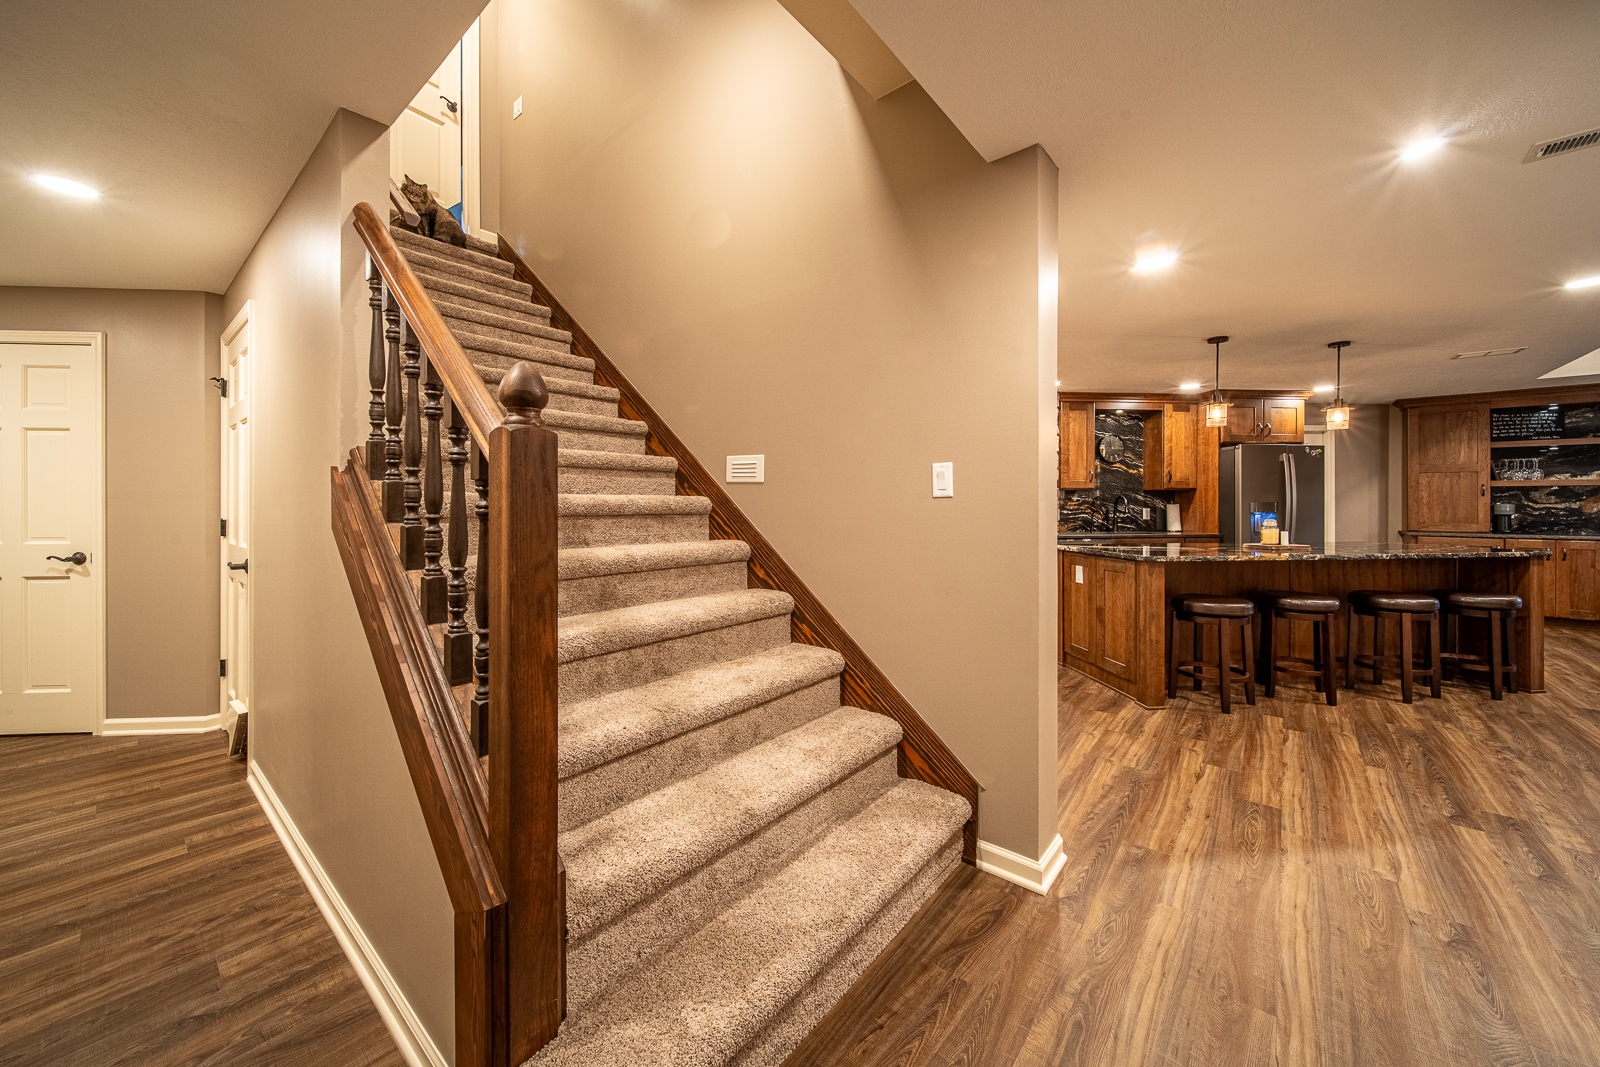 Wooden staircase with stylish railing in Ripple Creek Drive basement renovation.